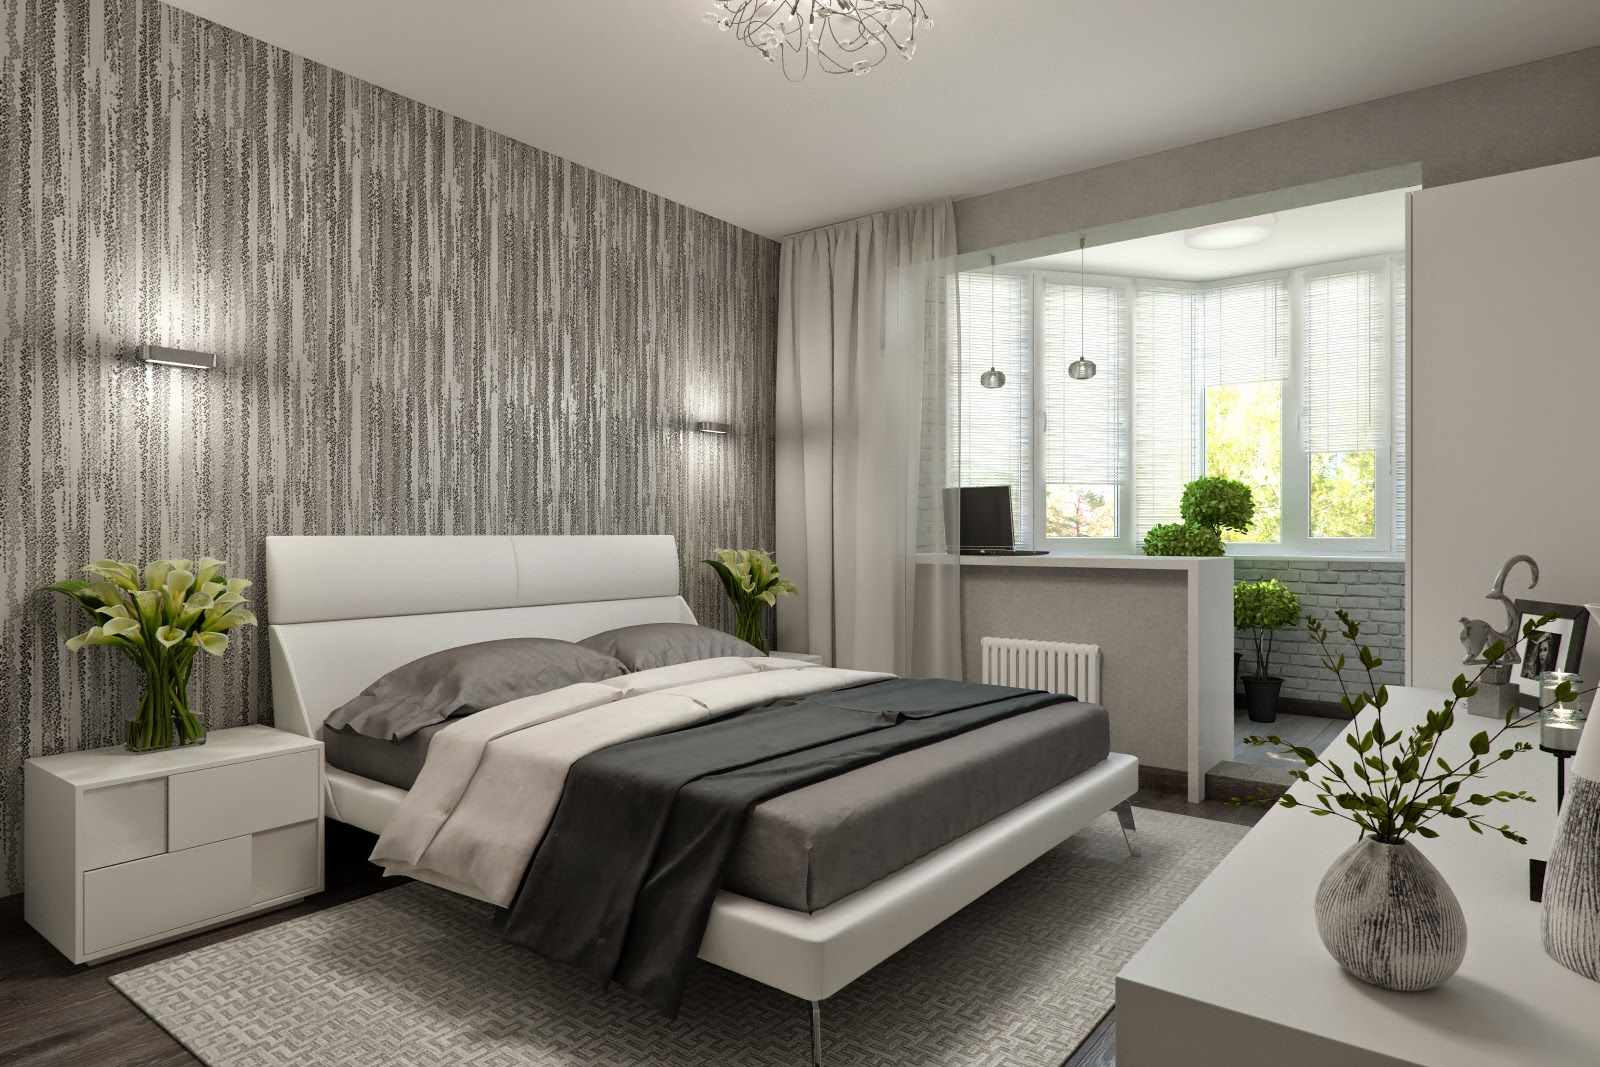 variant of an unusual design of a bedroom style